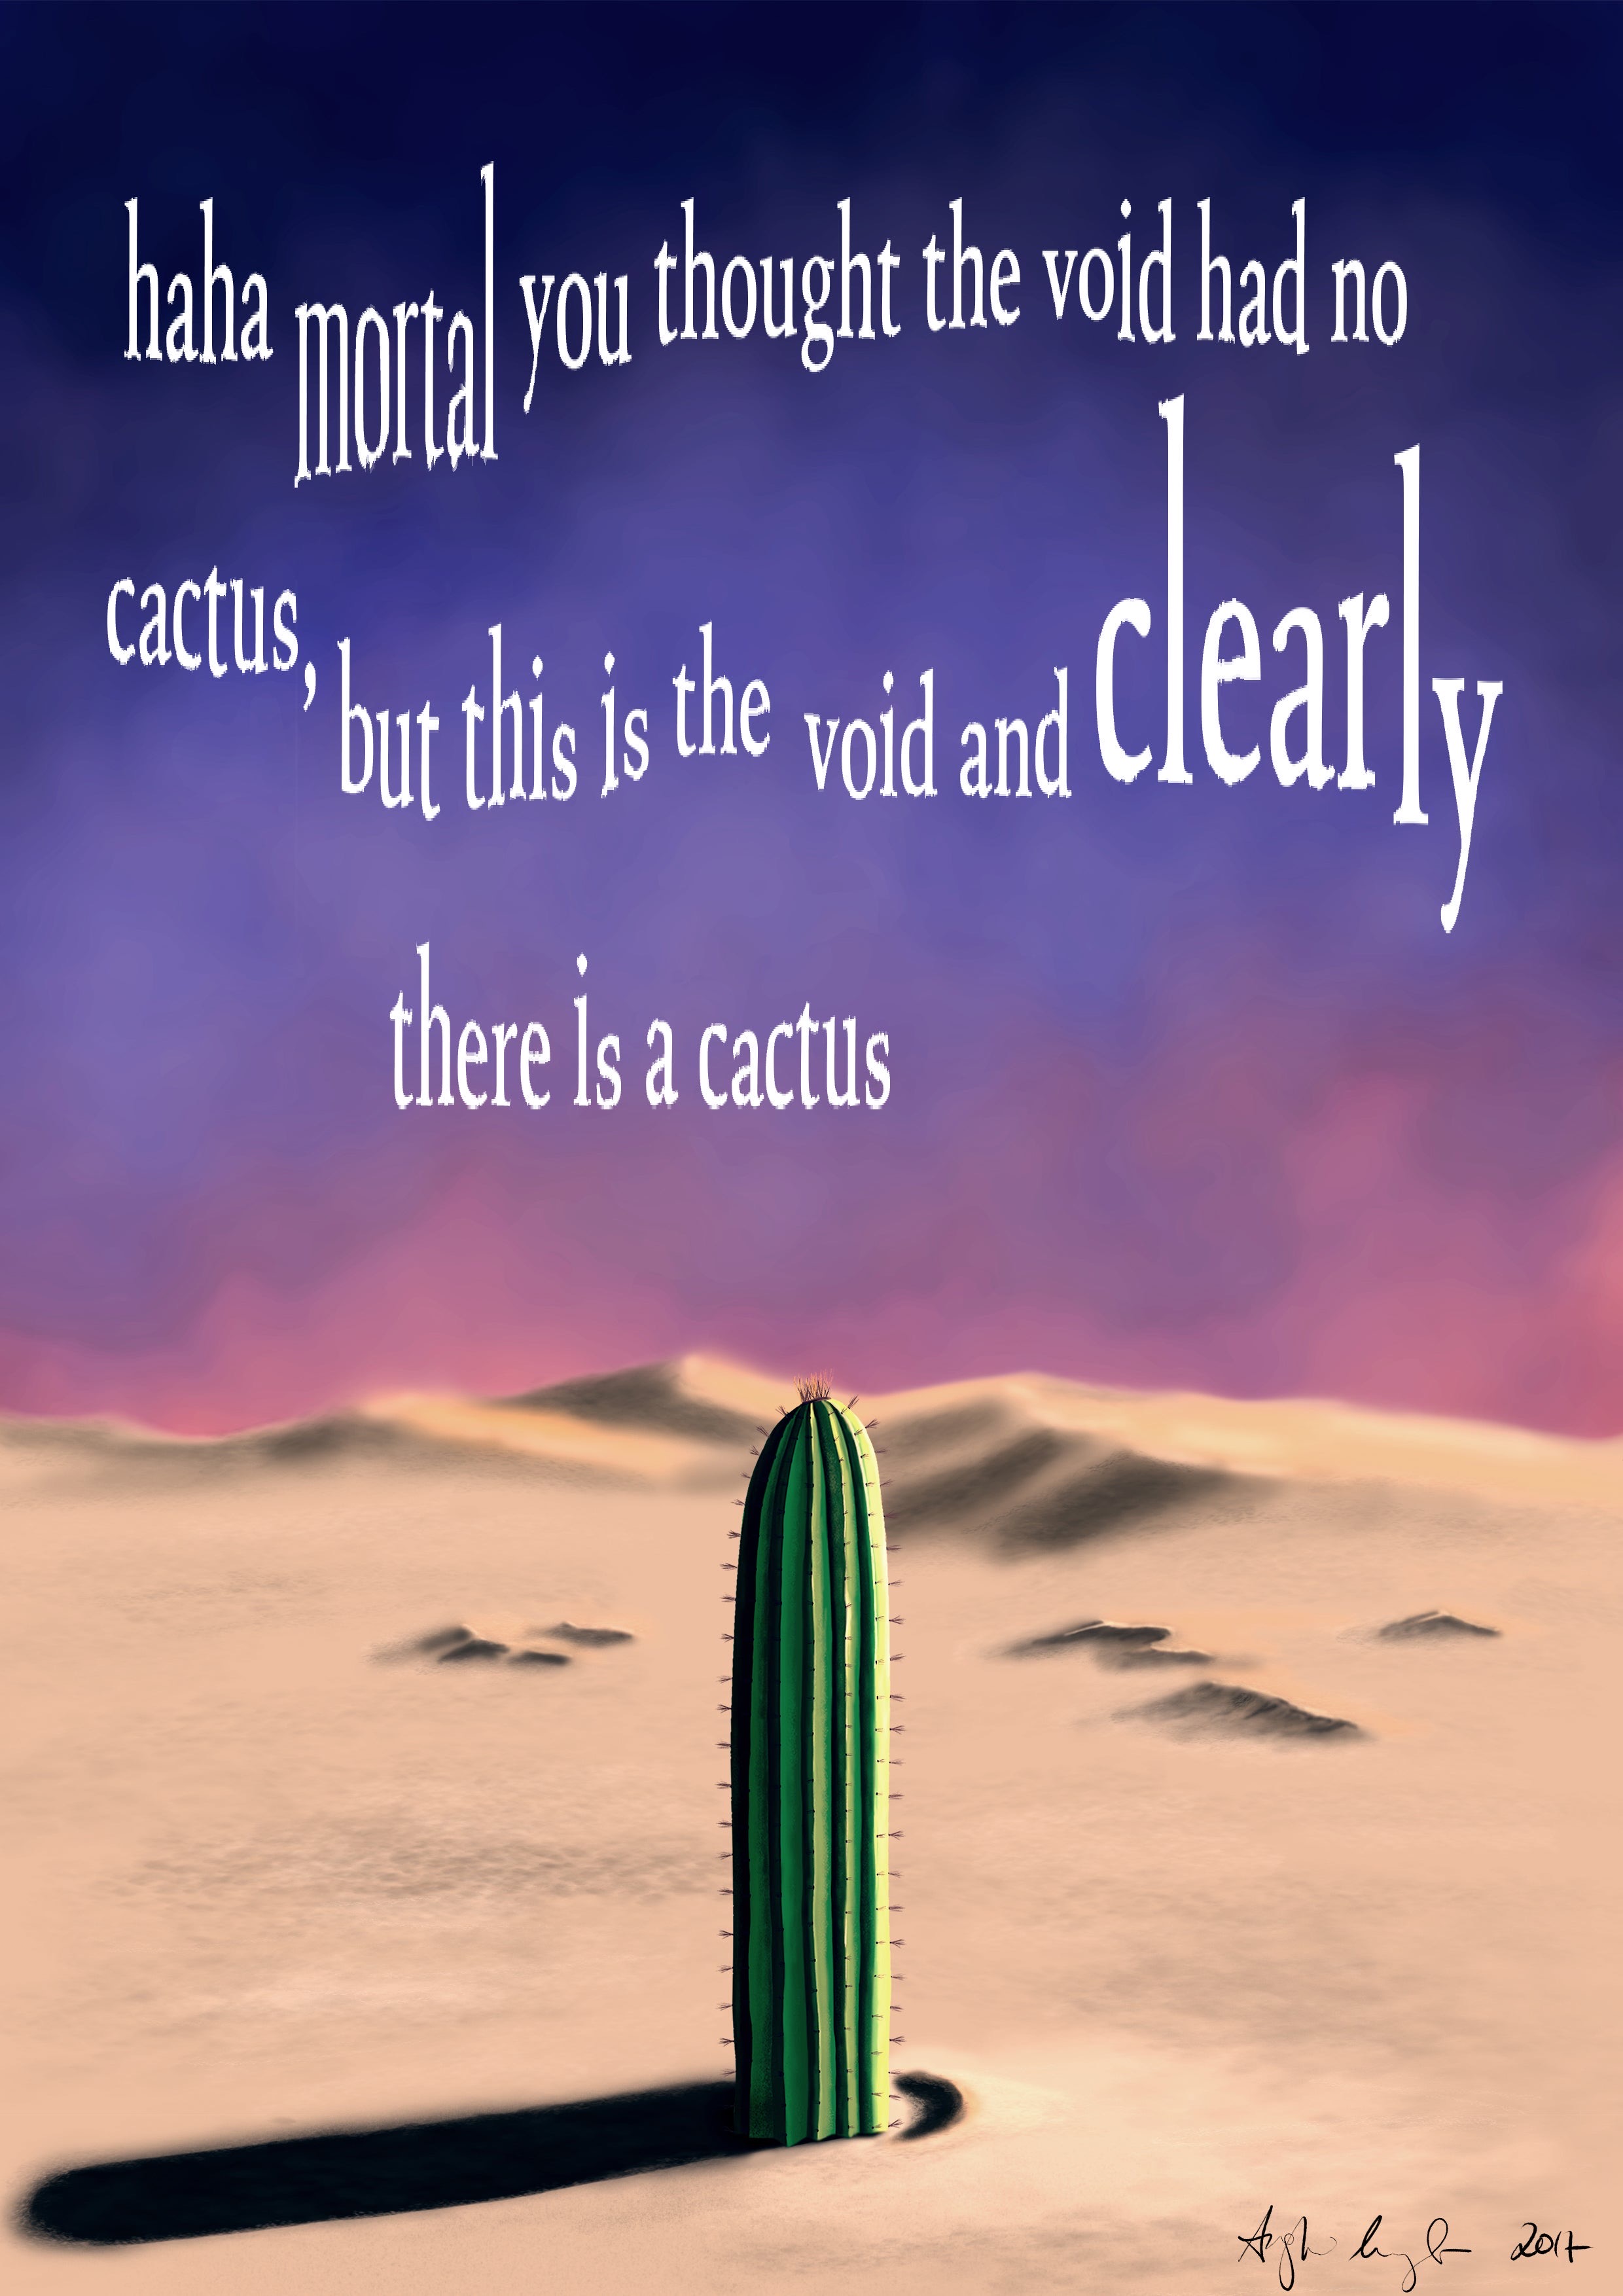 surreal memes cactus - haha mortal you thought the void had no katus, turthi is the void and clearly there is a cactus